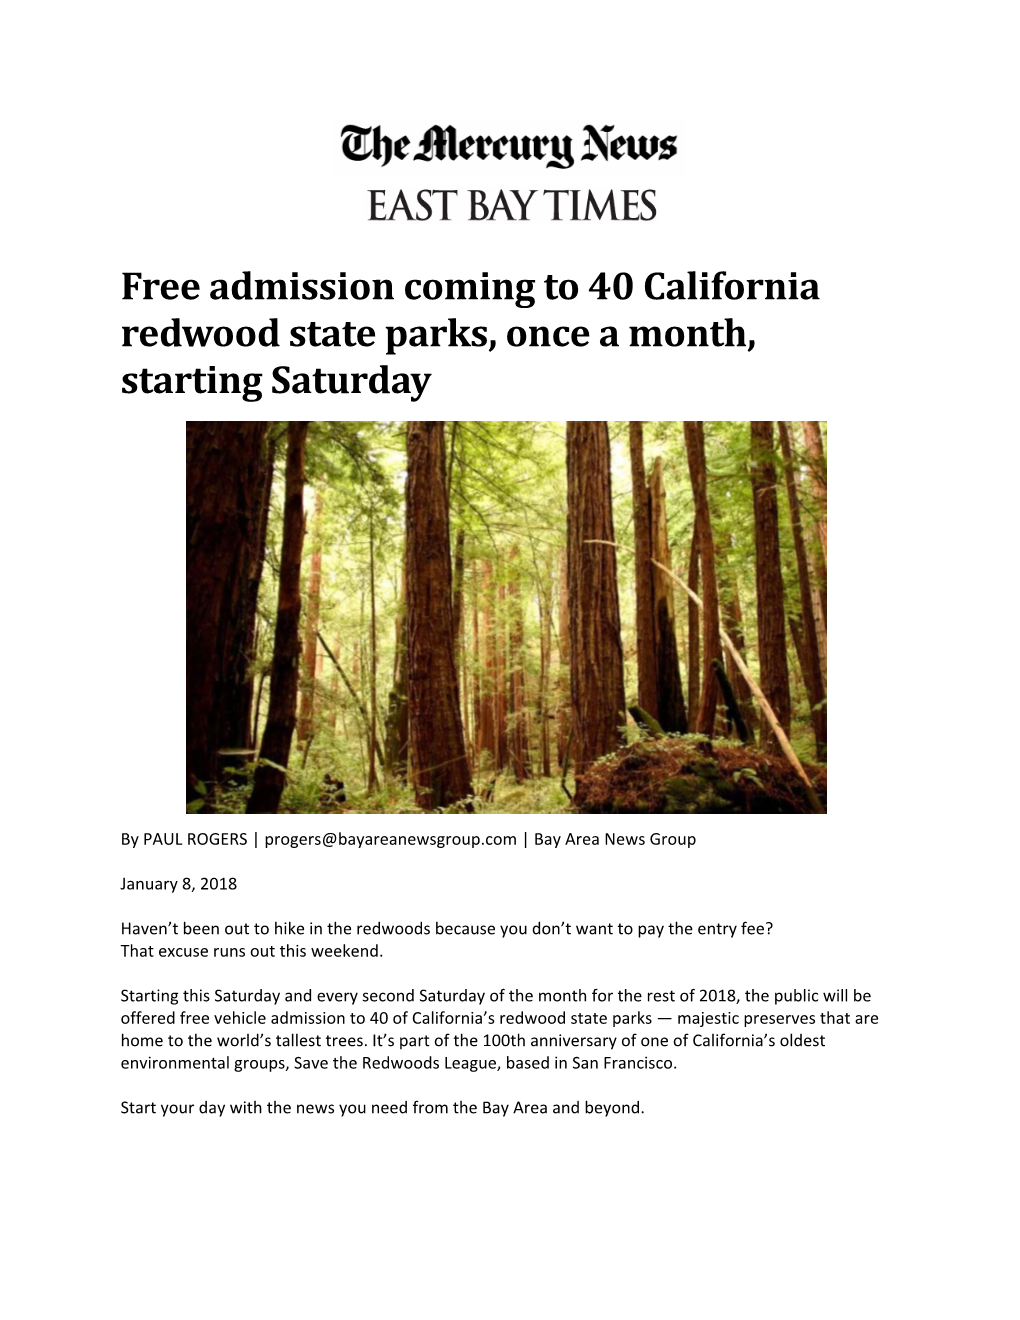 Free Admission Coming to 40 California Redwood State Parks, Once a Month, Starting Saturday